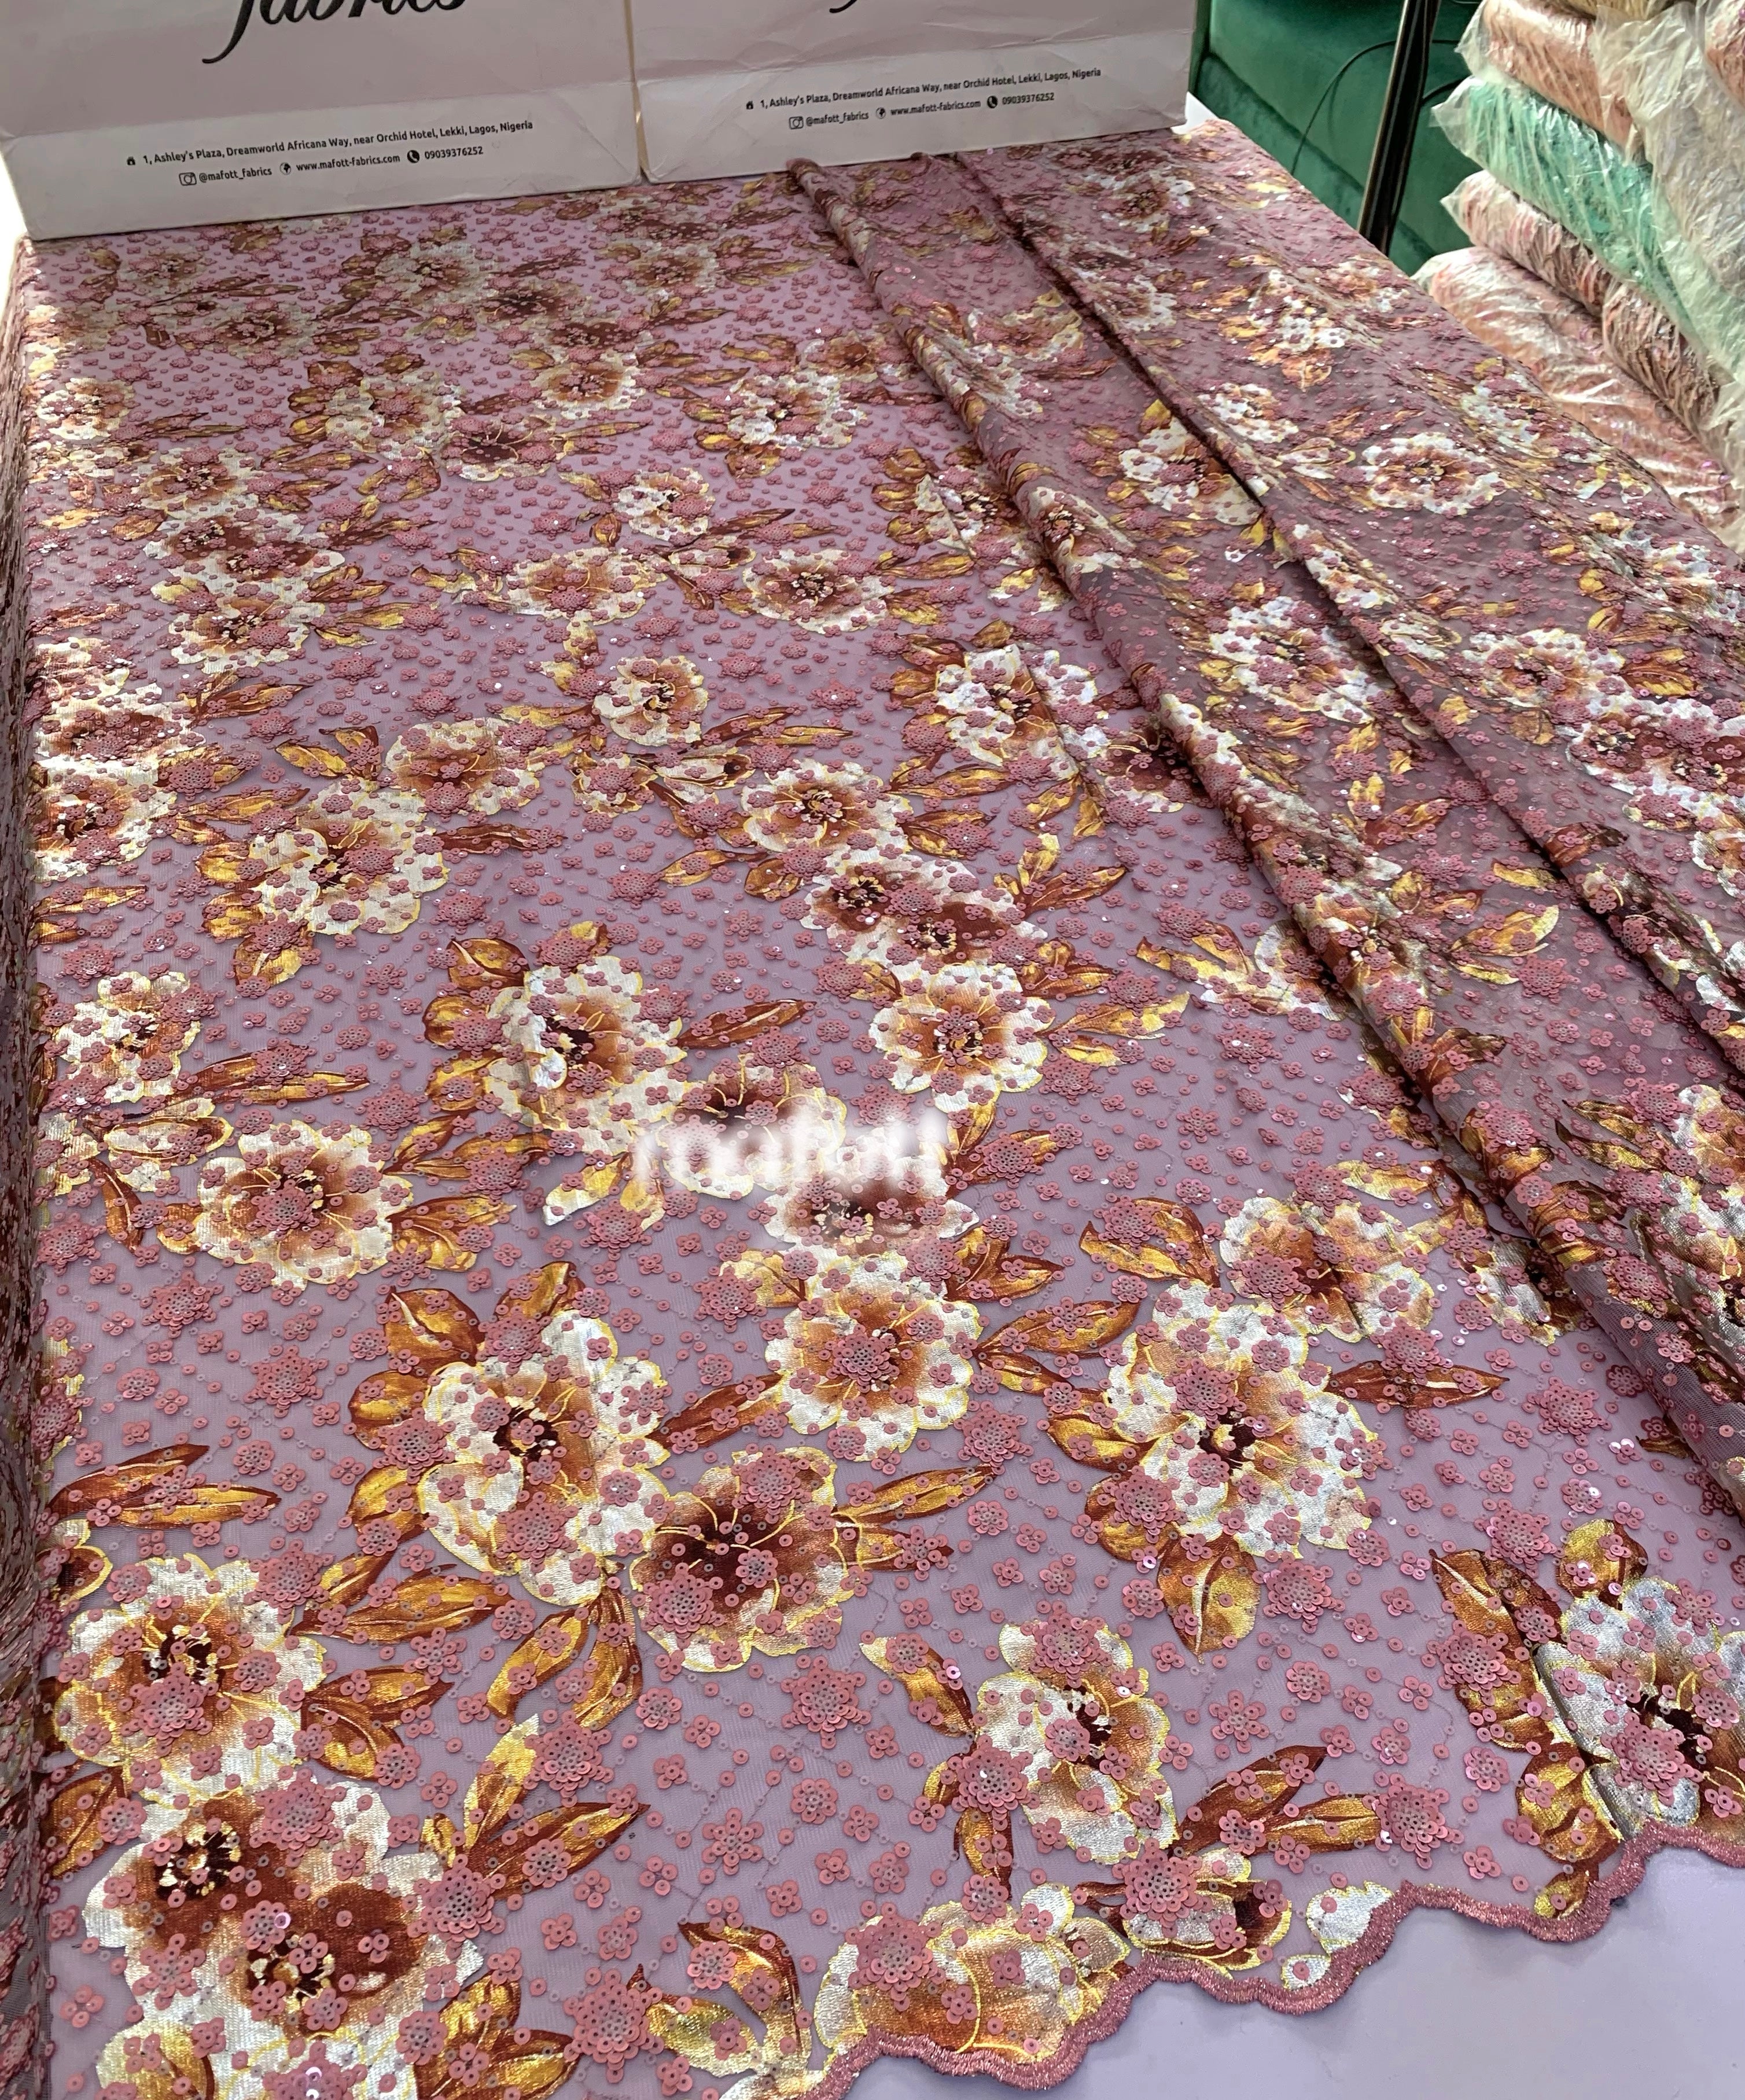 YG Floral - Price is for 1 yard (Minimum is 3 yards)